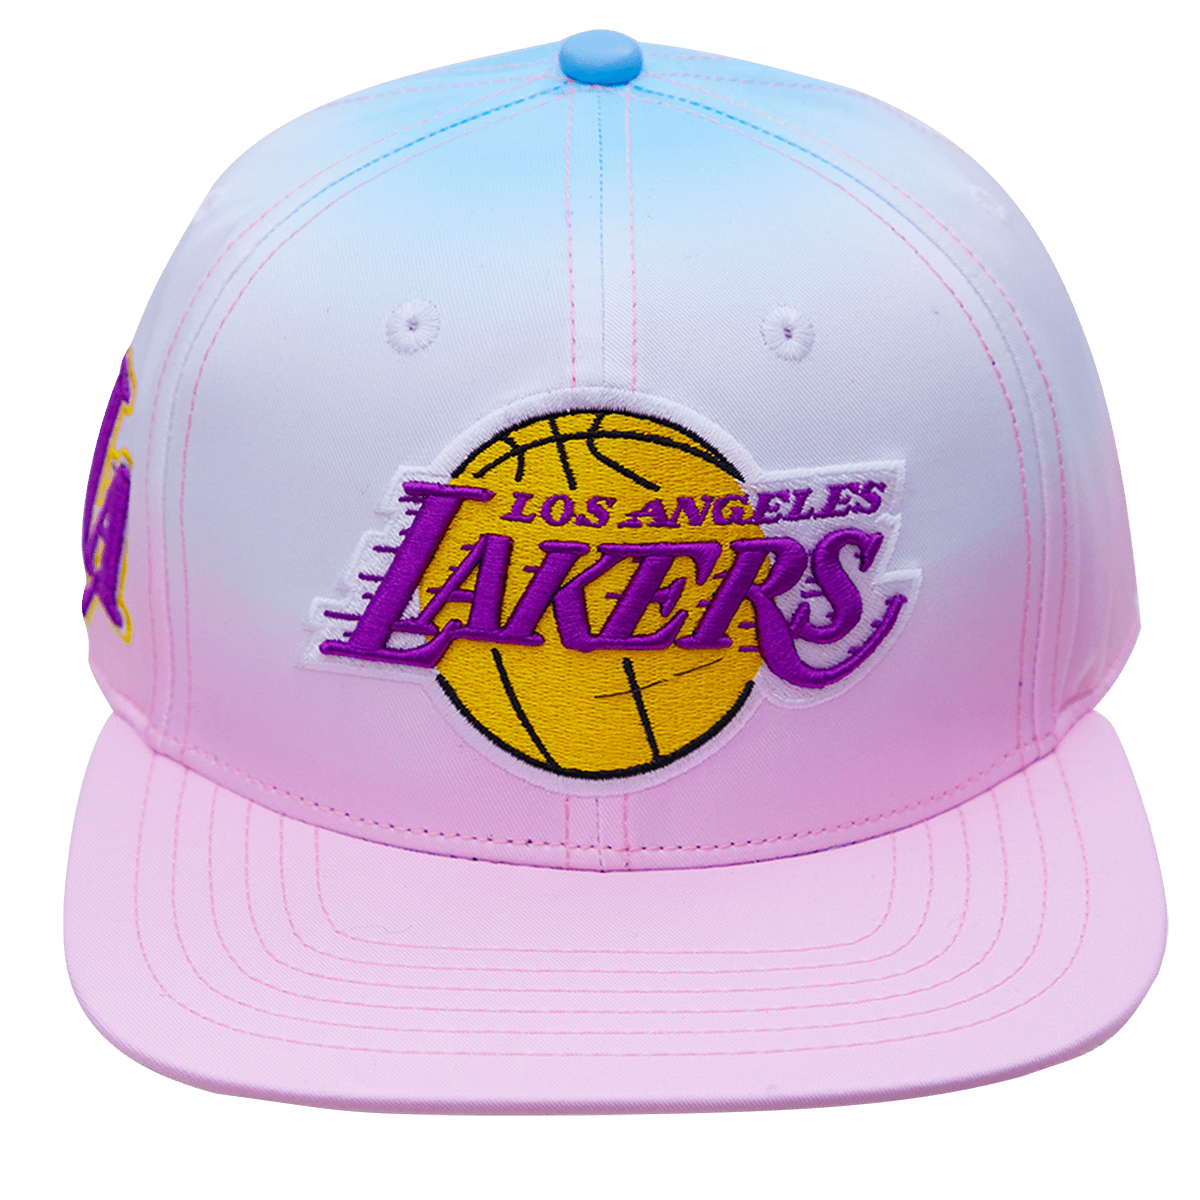 Los Angeles Lakers Men's Down for All Snapback Hat